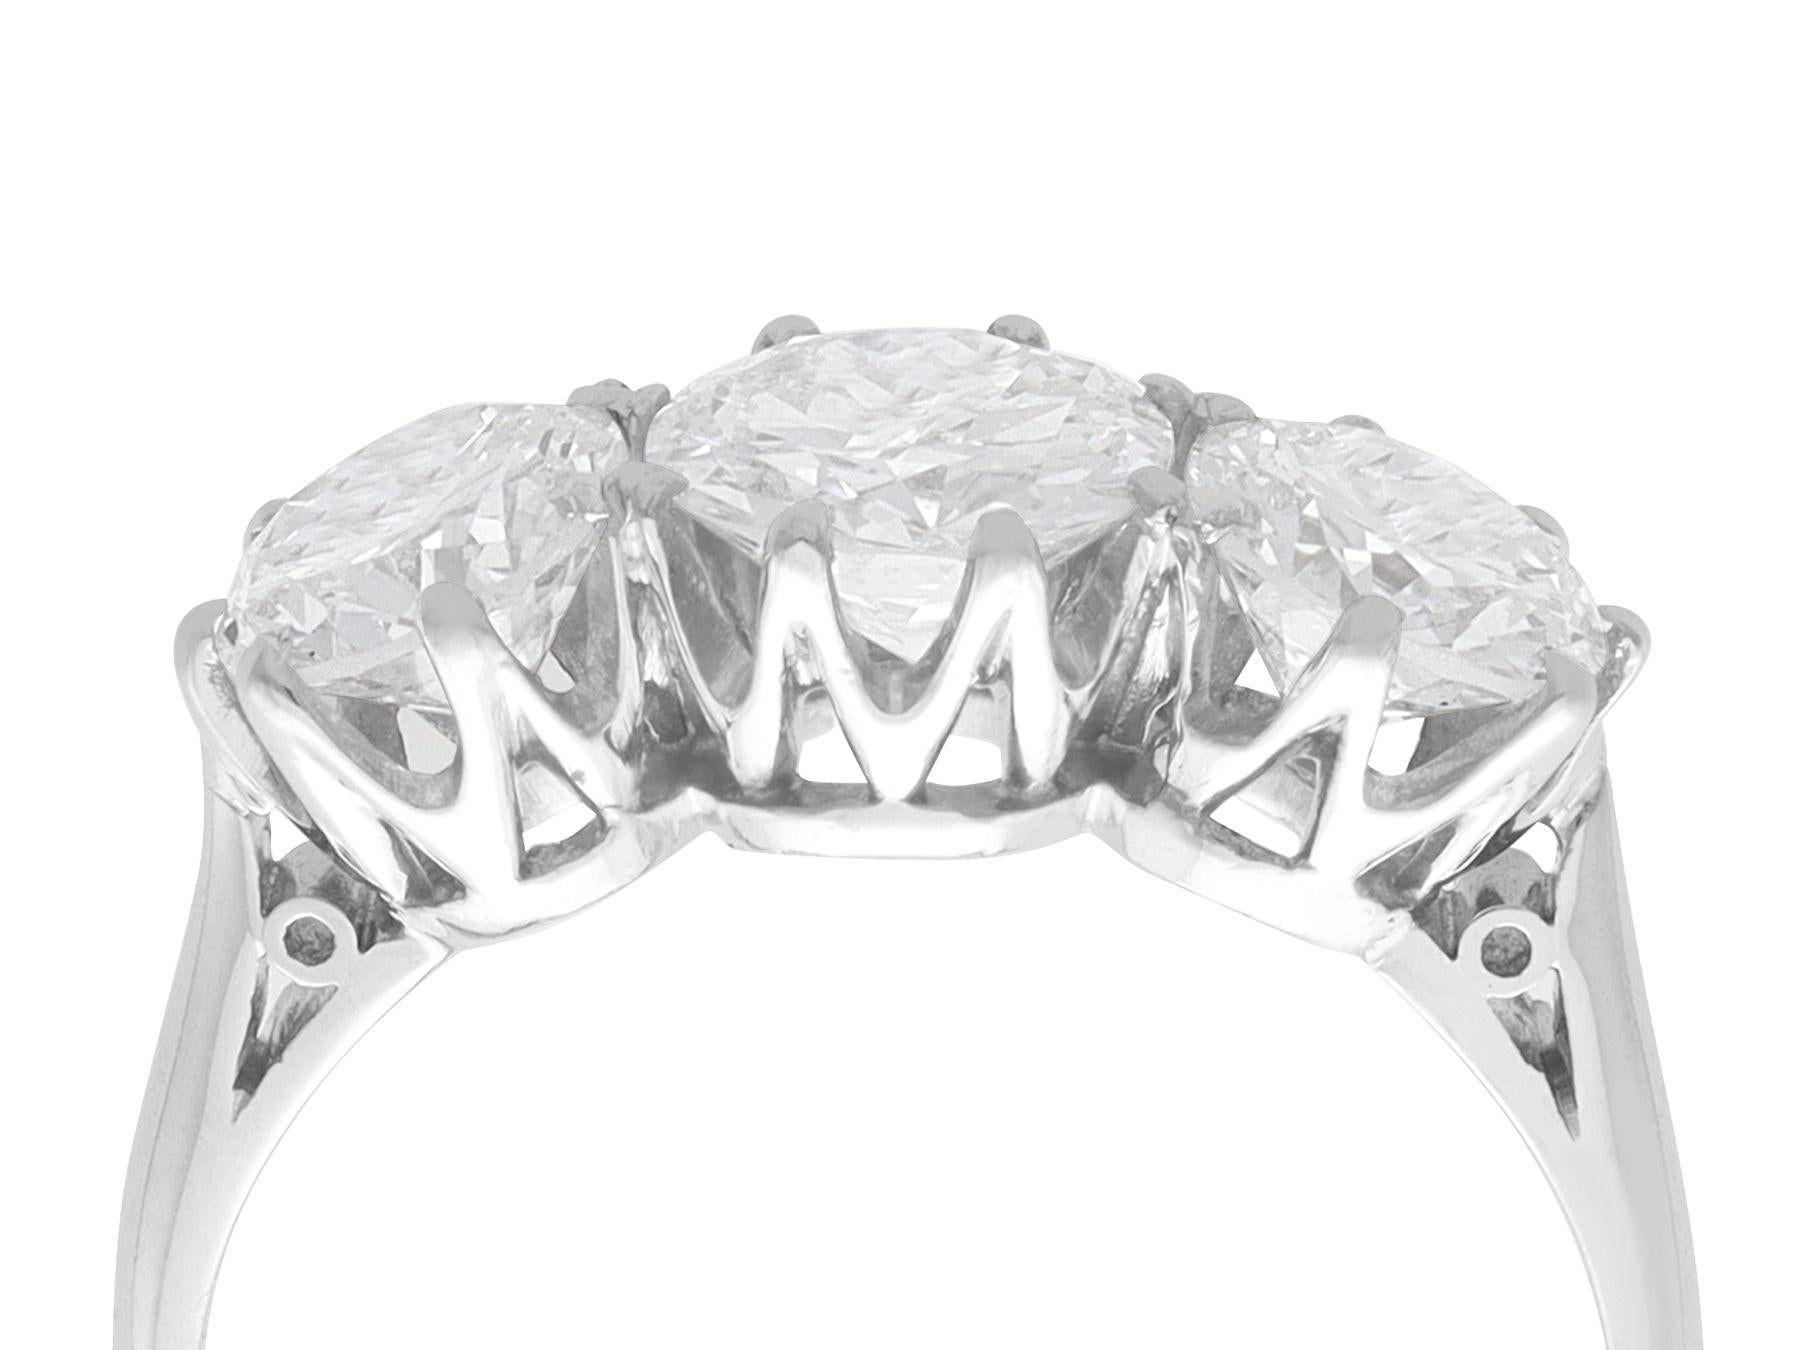 A stunning, fine and impressive 2.05 carat diamond and platinum trilogy ring; part of our diverse engagement ring collections.

This stunning 1930s platinum trilogy diamond ring has been crafted in platinum.

The pierced decorated setting is